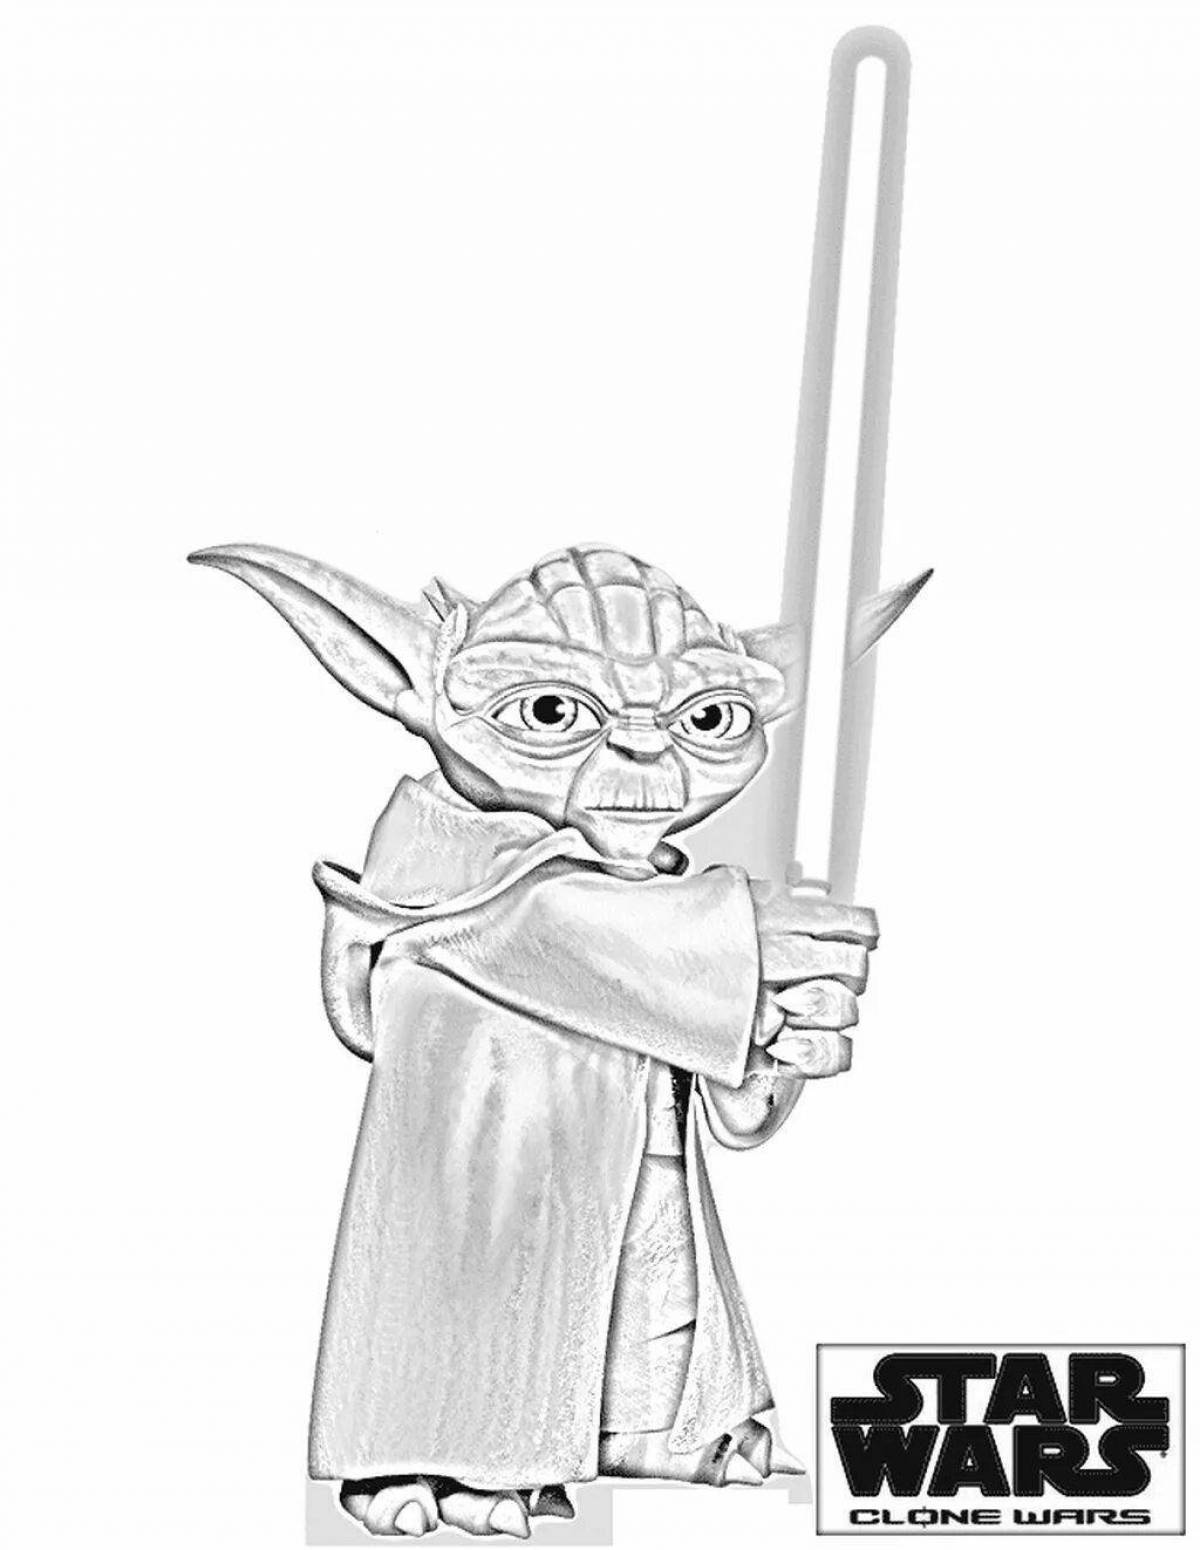 Yoda's colorfully shaded coloring page